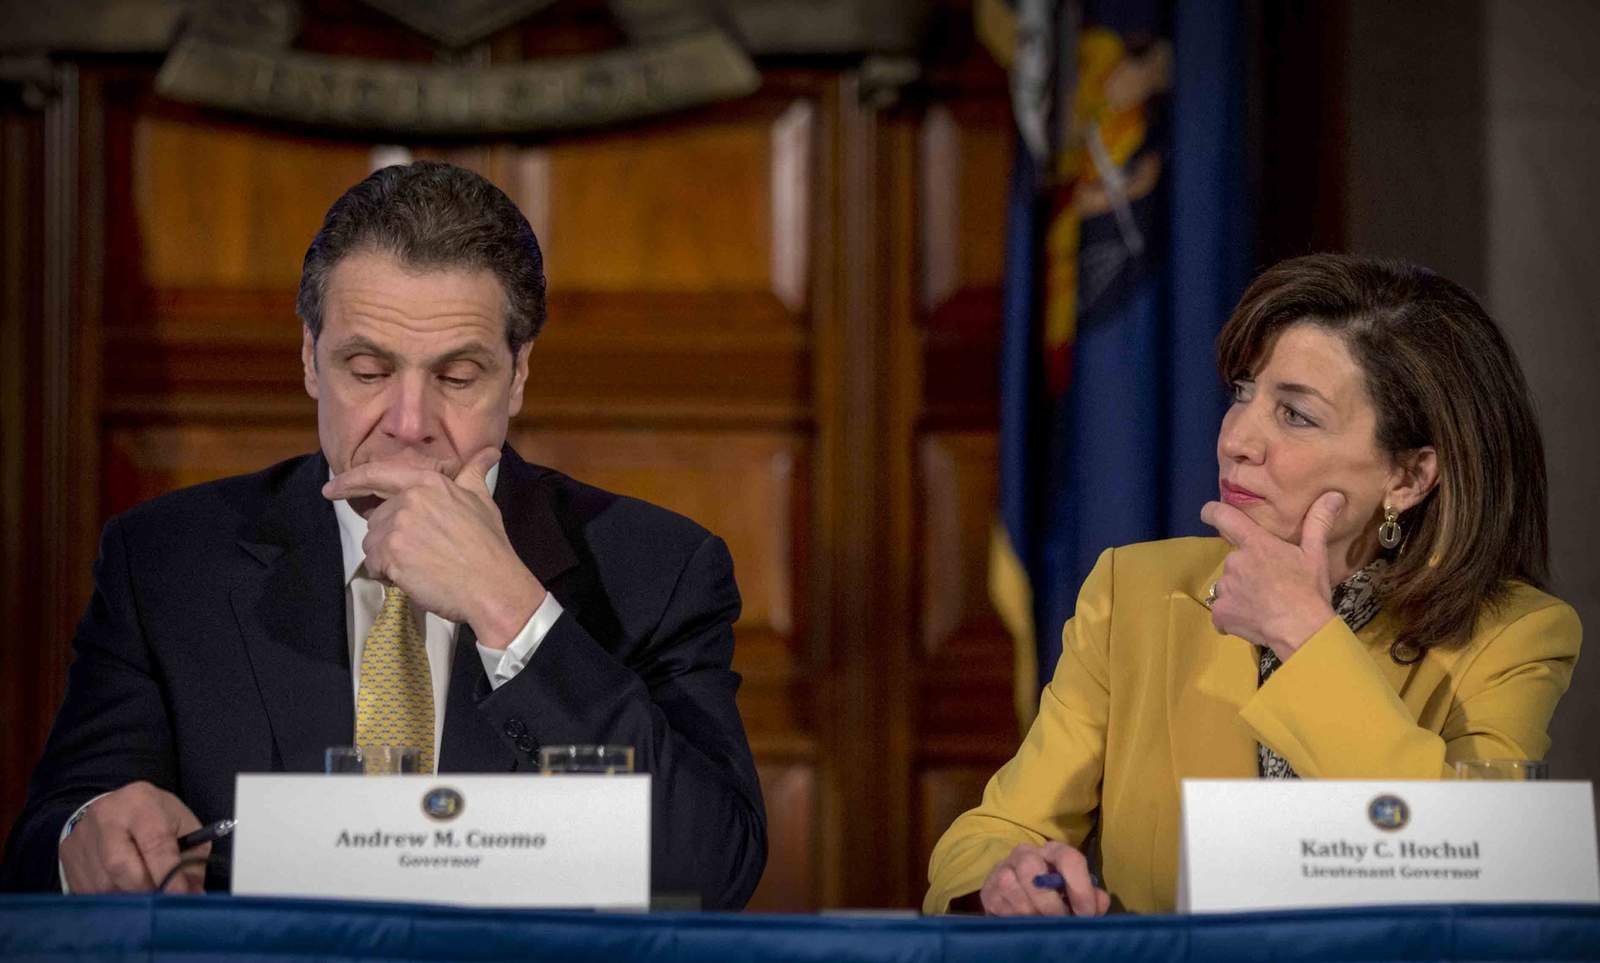 How Cuomo investigation, possible impeachment could play out